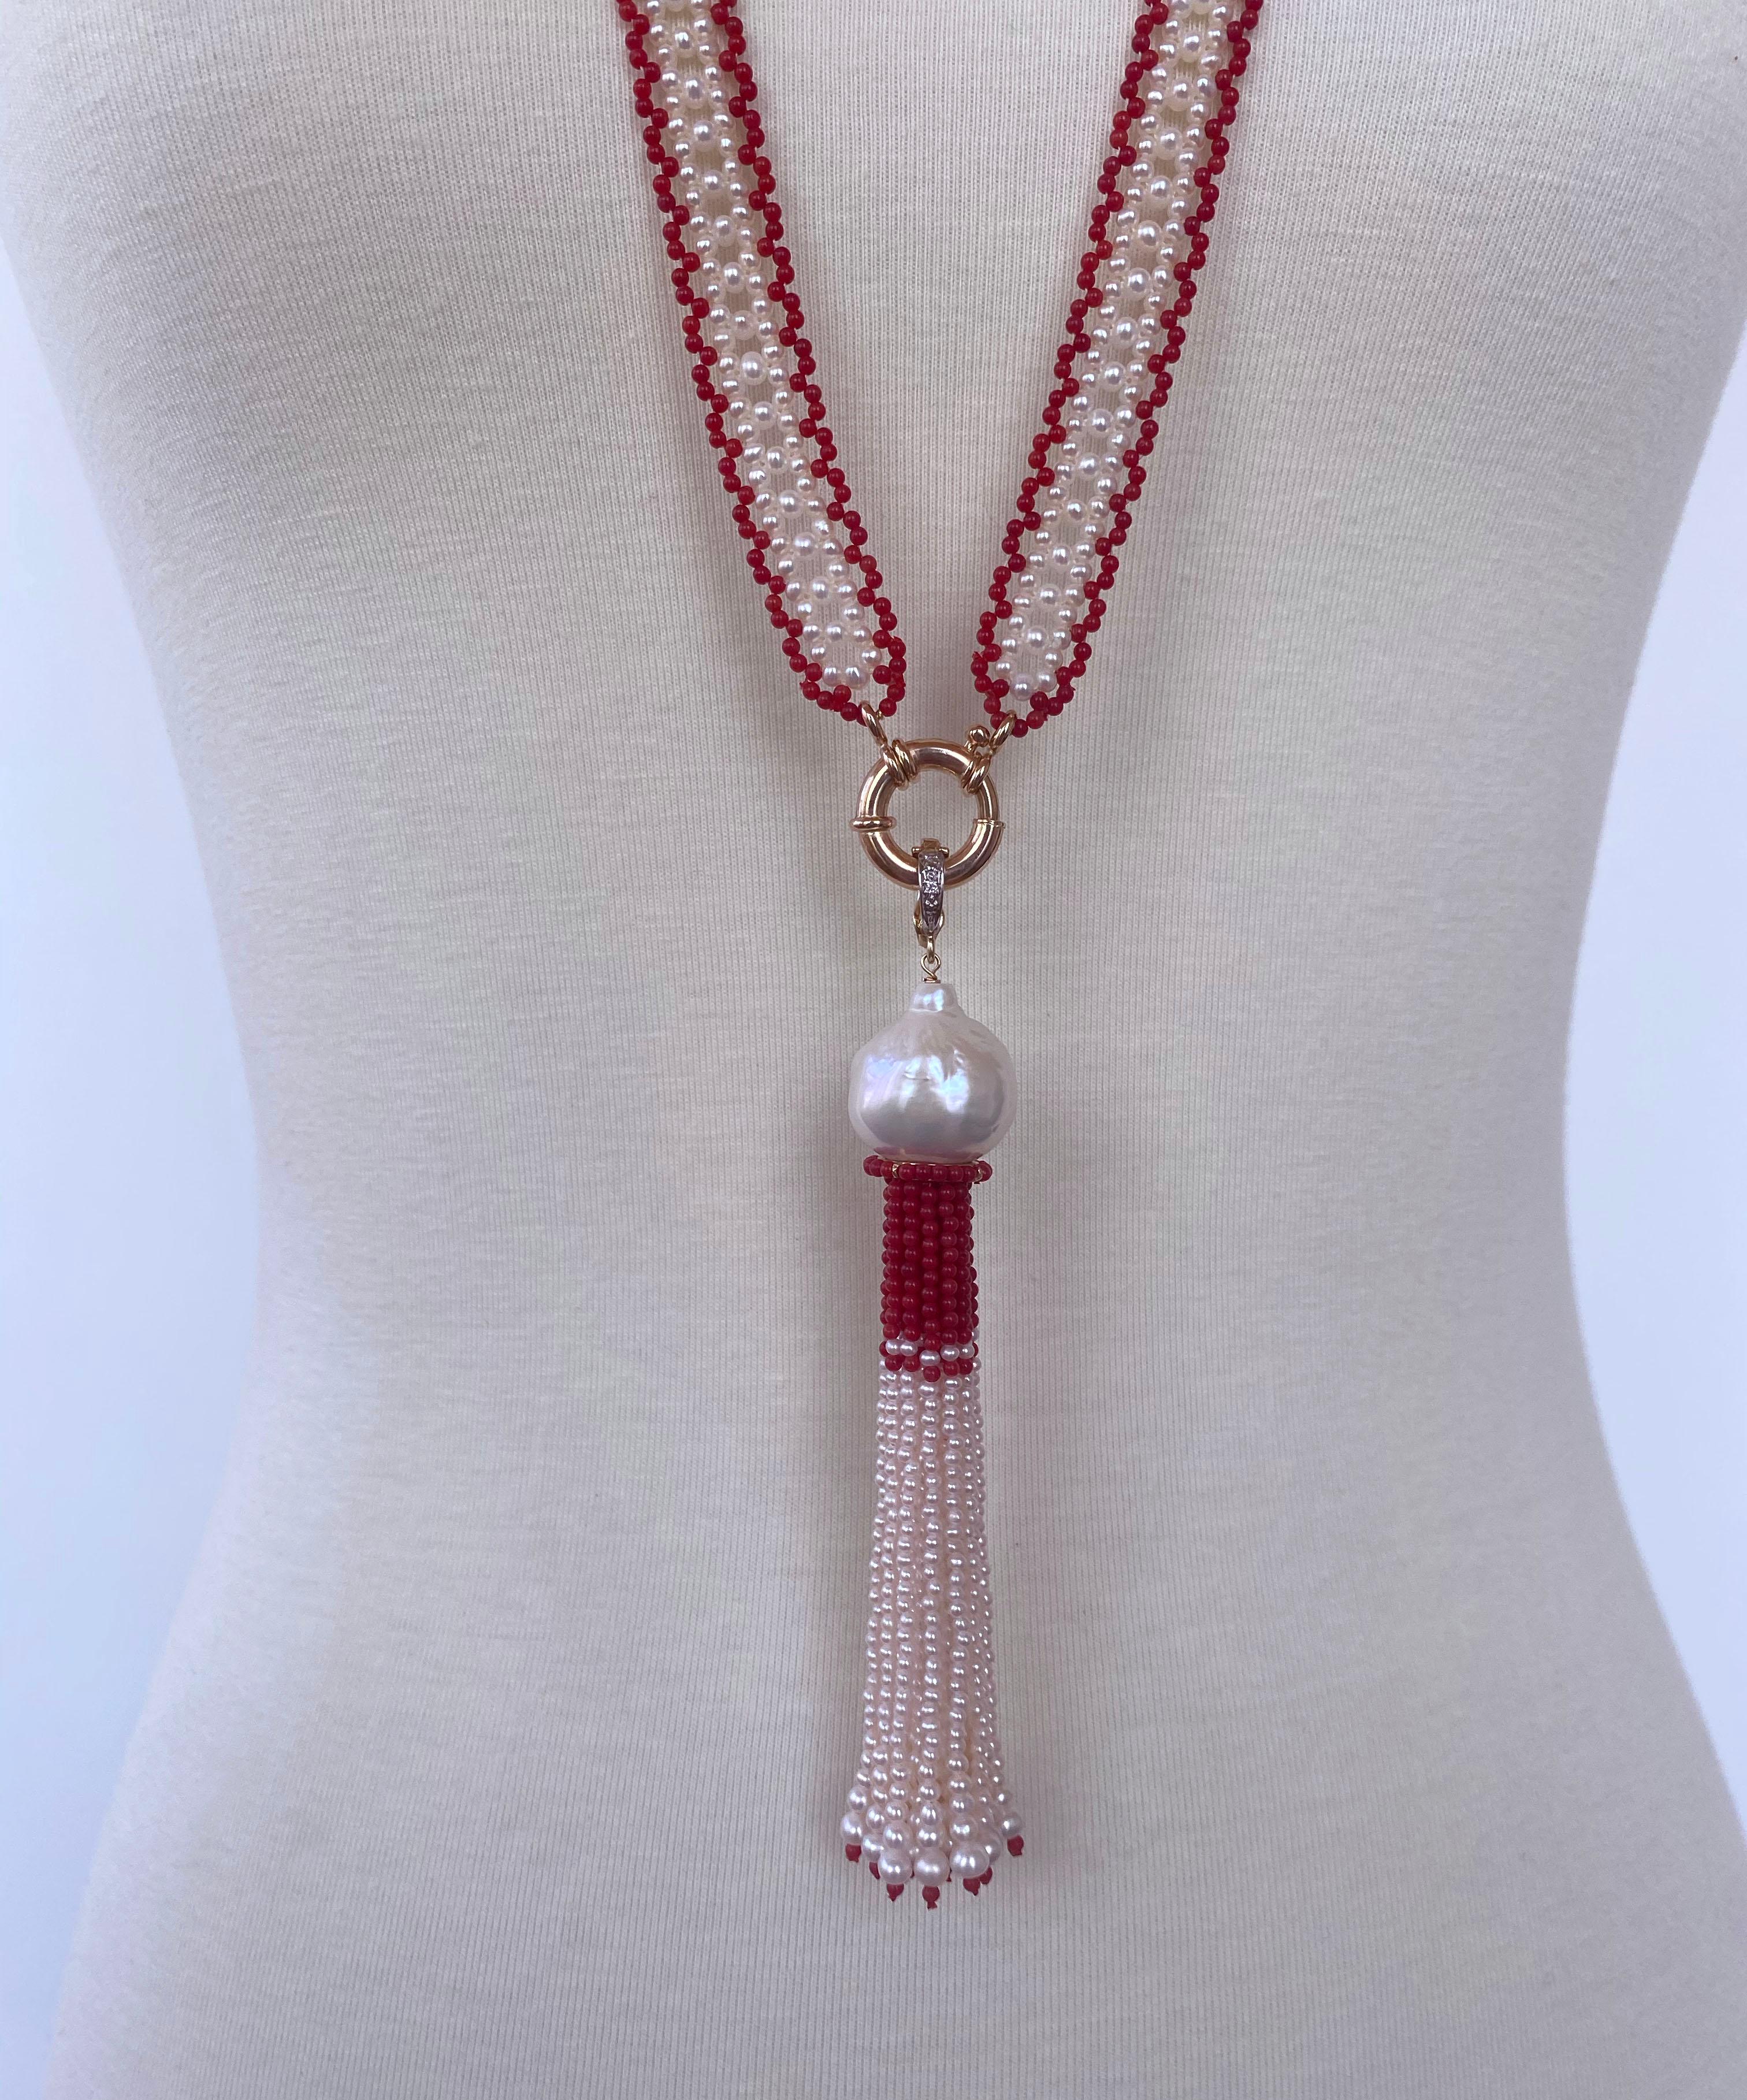 Gorgeous piece intricately hand woven by Marina J. This Art Deco inspired Satuoir features fine Red Coral beads beautifully bordering high luster white Pearls, giving the piece an amazing Lace like pattern and look. Measuring 35.25 inches sans